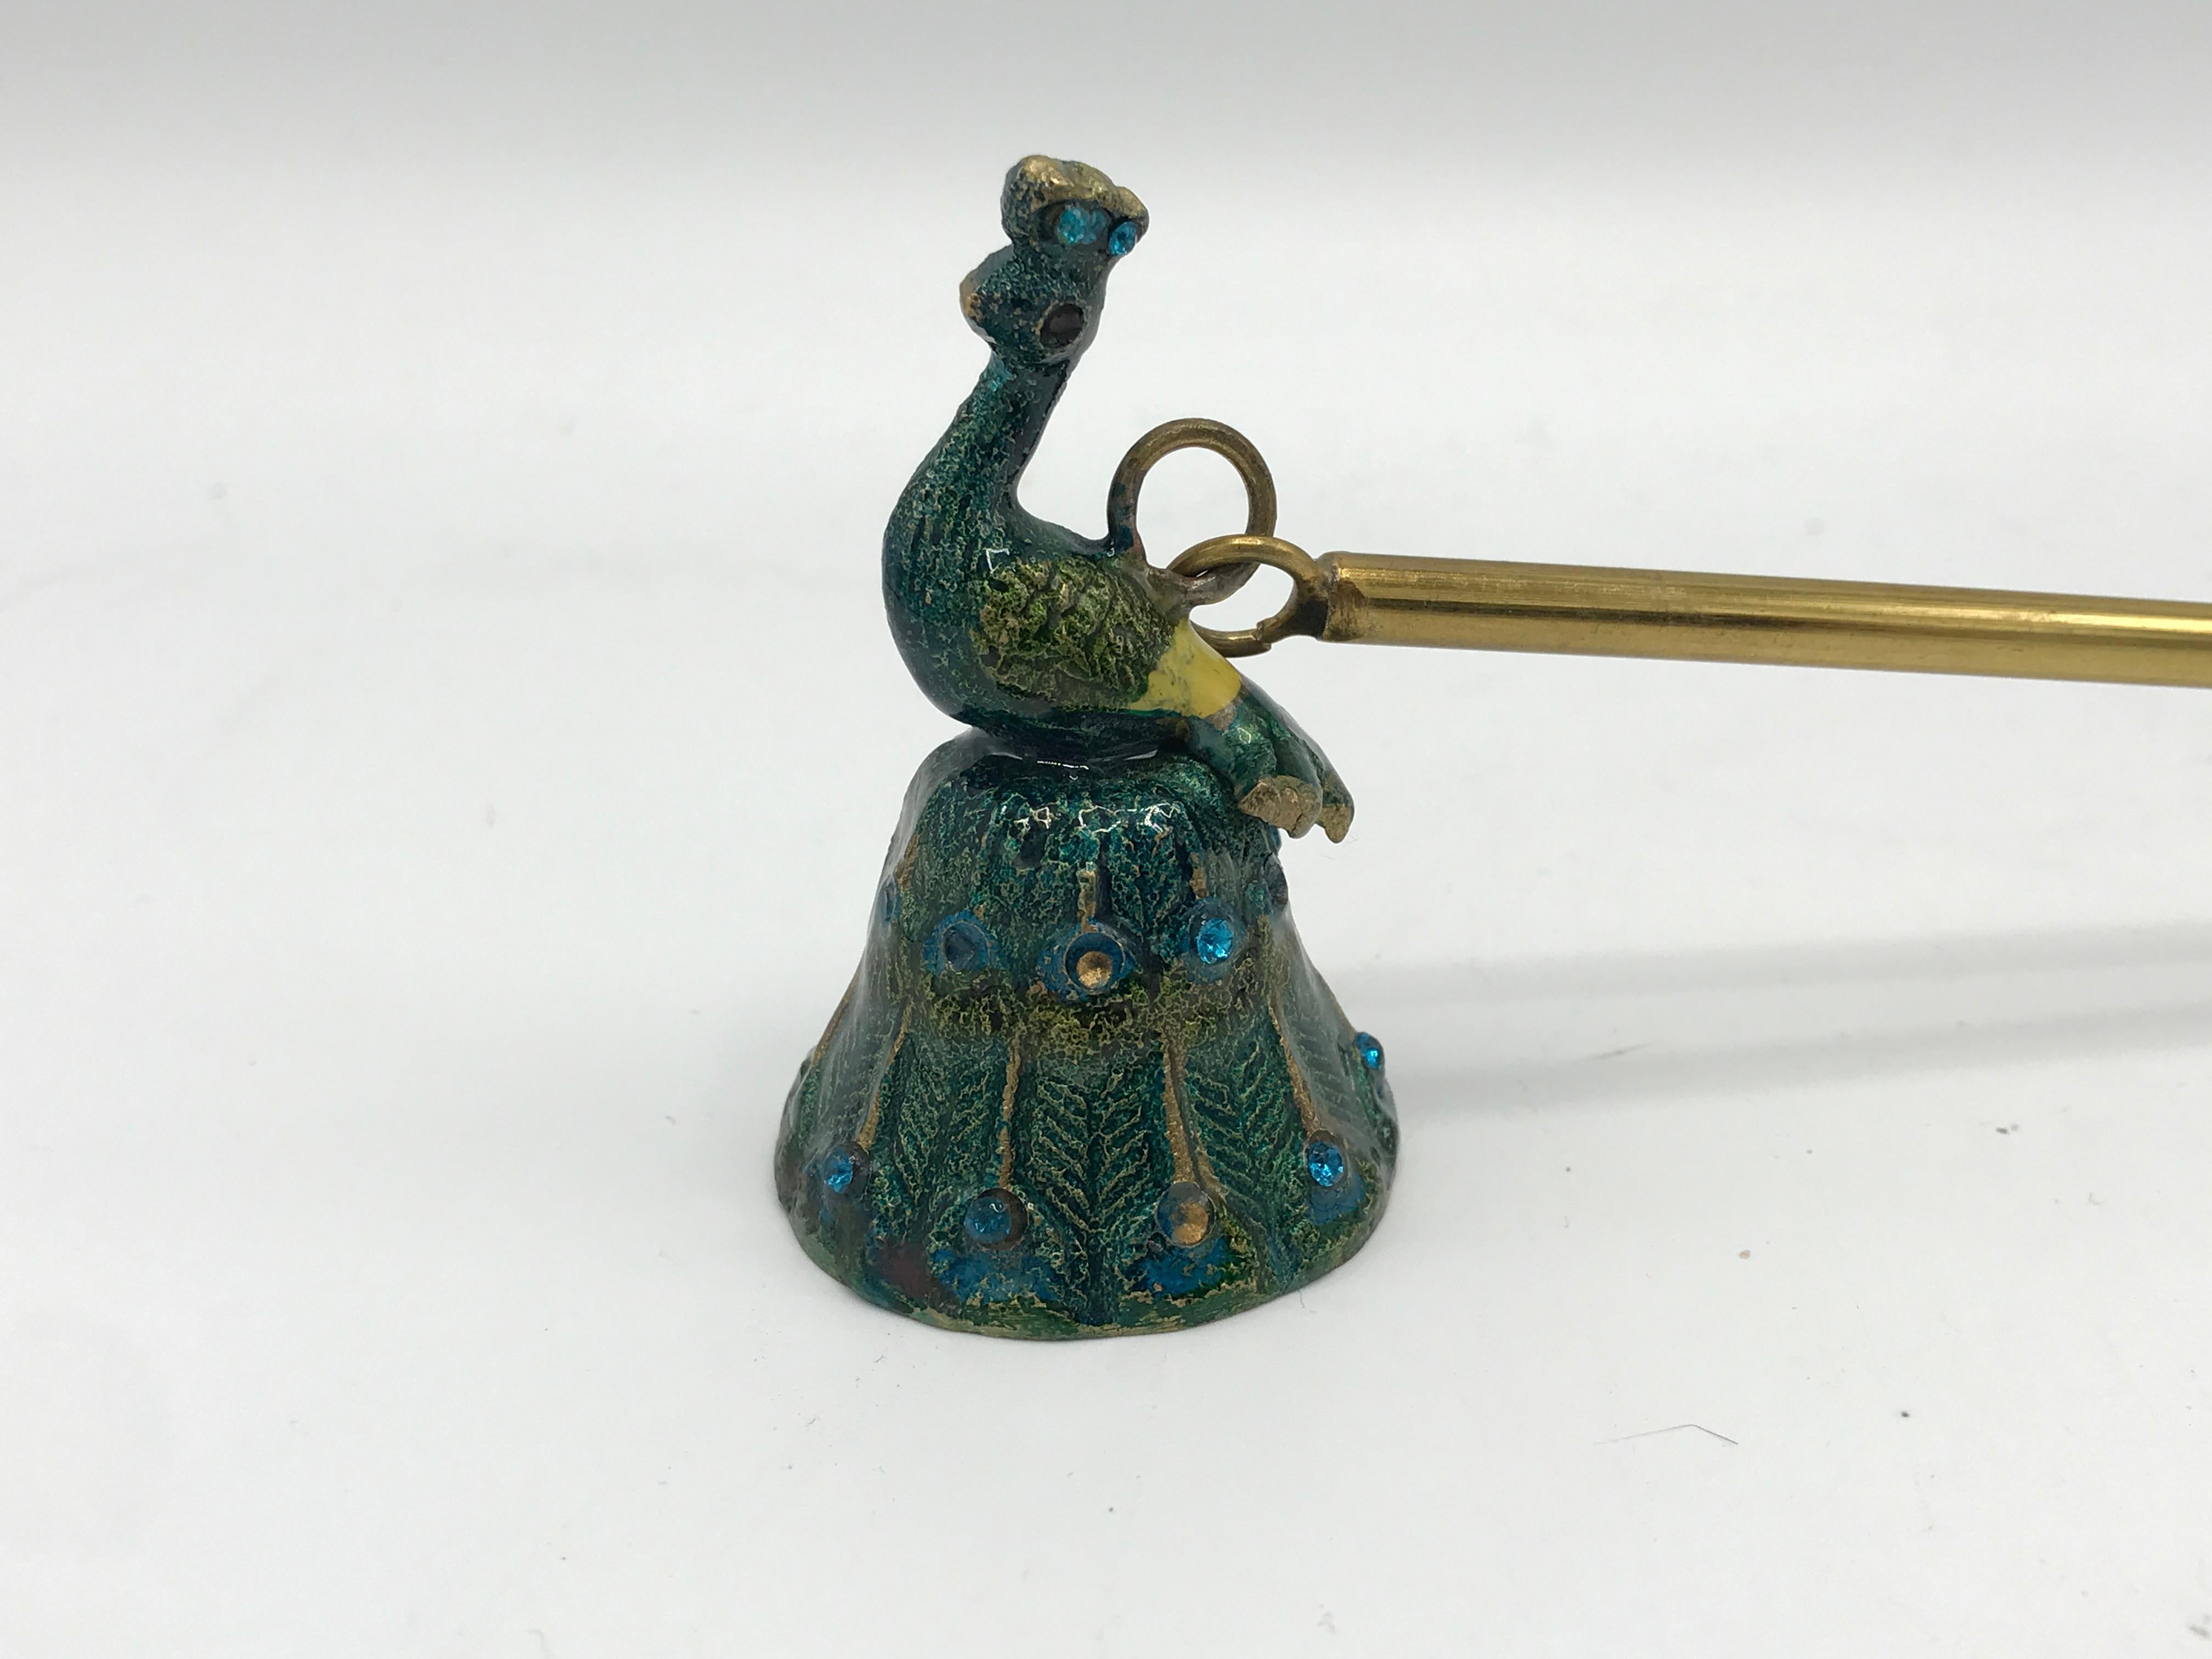 Offered is a fabulous, 1980s cloisonne candle snuffer with a sculptural peacock motif. The Long handle is solid brass, connecting by loop and ring, to the cloisonne peacock. Handle measures 10in. Peacock measures: 2.25in height x 1.5in diameter.